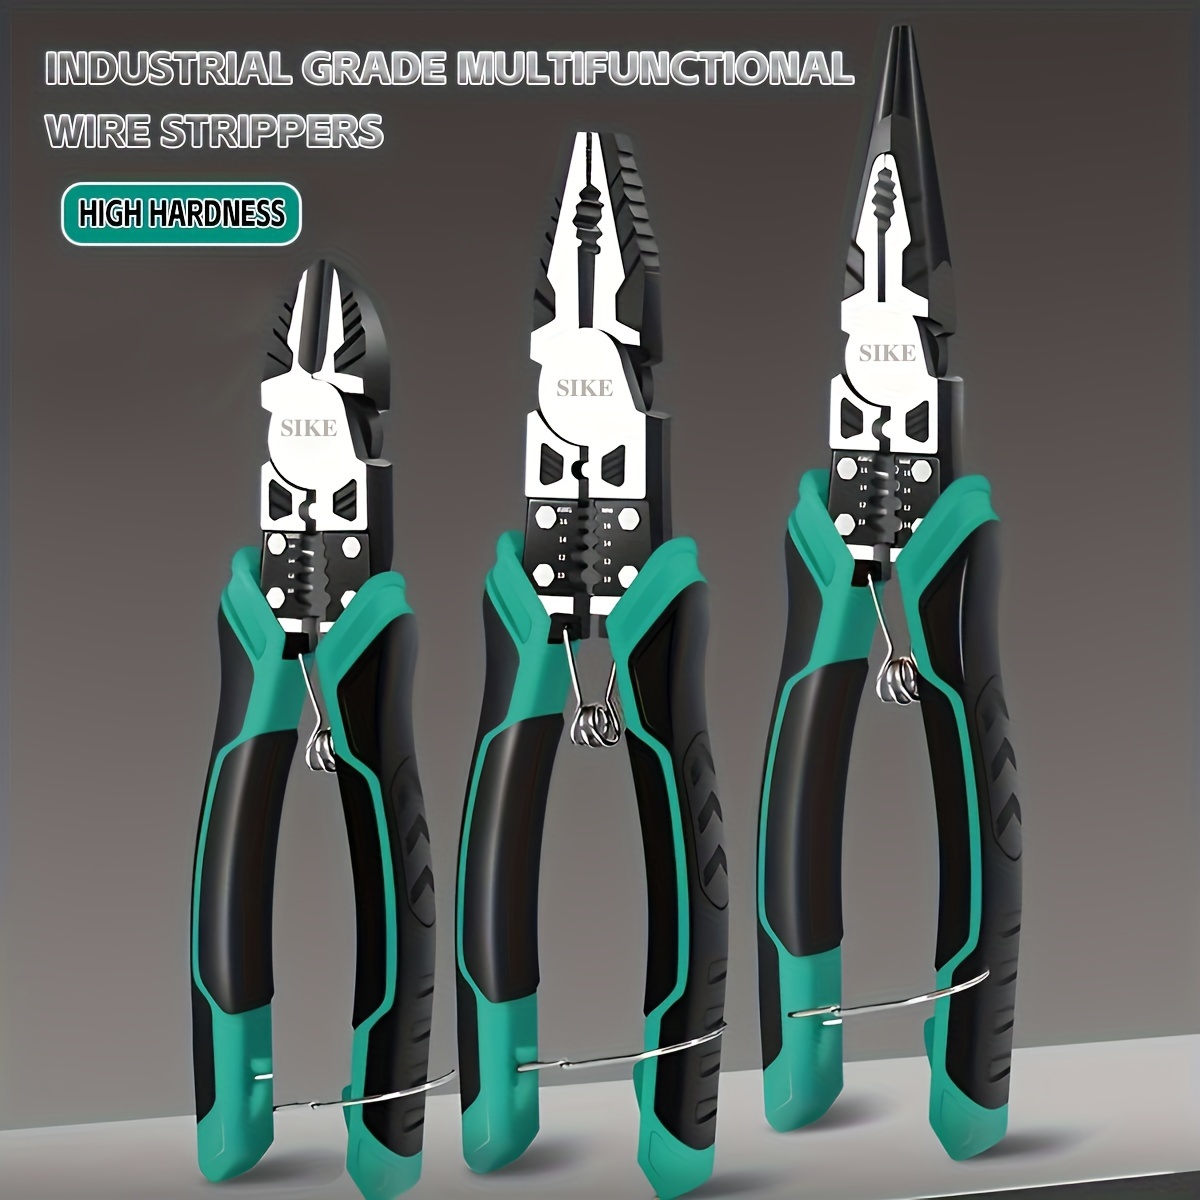 

9-in-1 Multifunctional Pliers Set - Perfect For Cutting, Clamping & Stripping Wire - Labor-saving Spring For Electricians & Diyers!